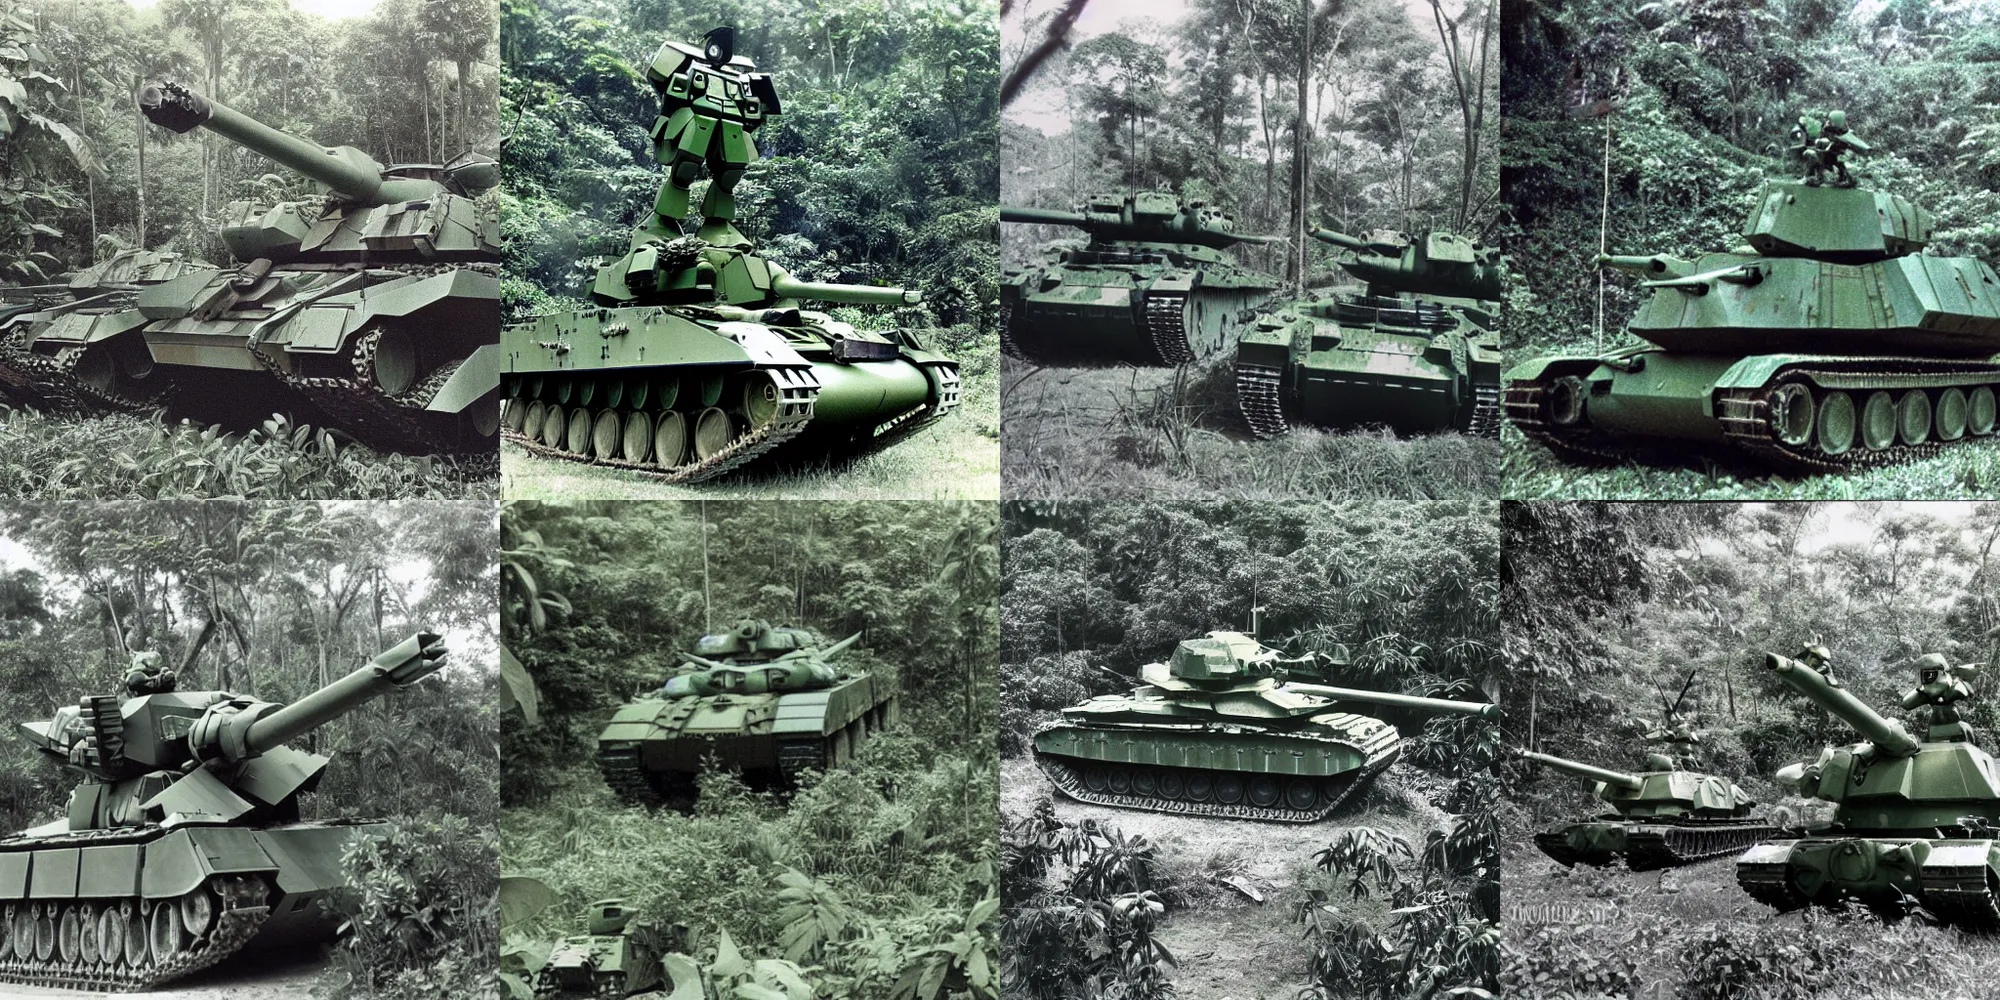 Prompt: 35mm photo of camouflage green color, giant gundam mecha in Vietnam jungle, towering over tanks and soldiers, photorealism, 1969 photo, 8k